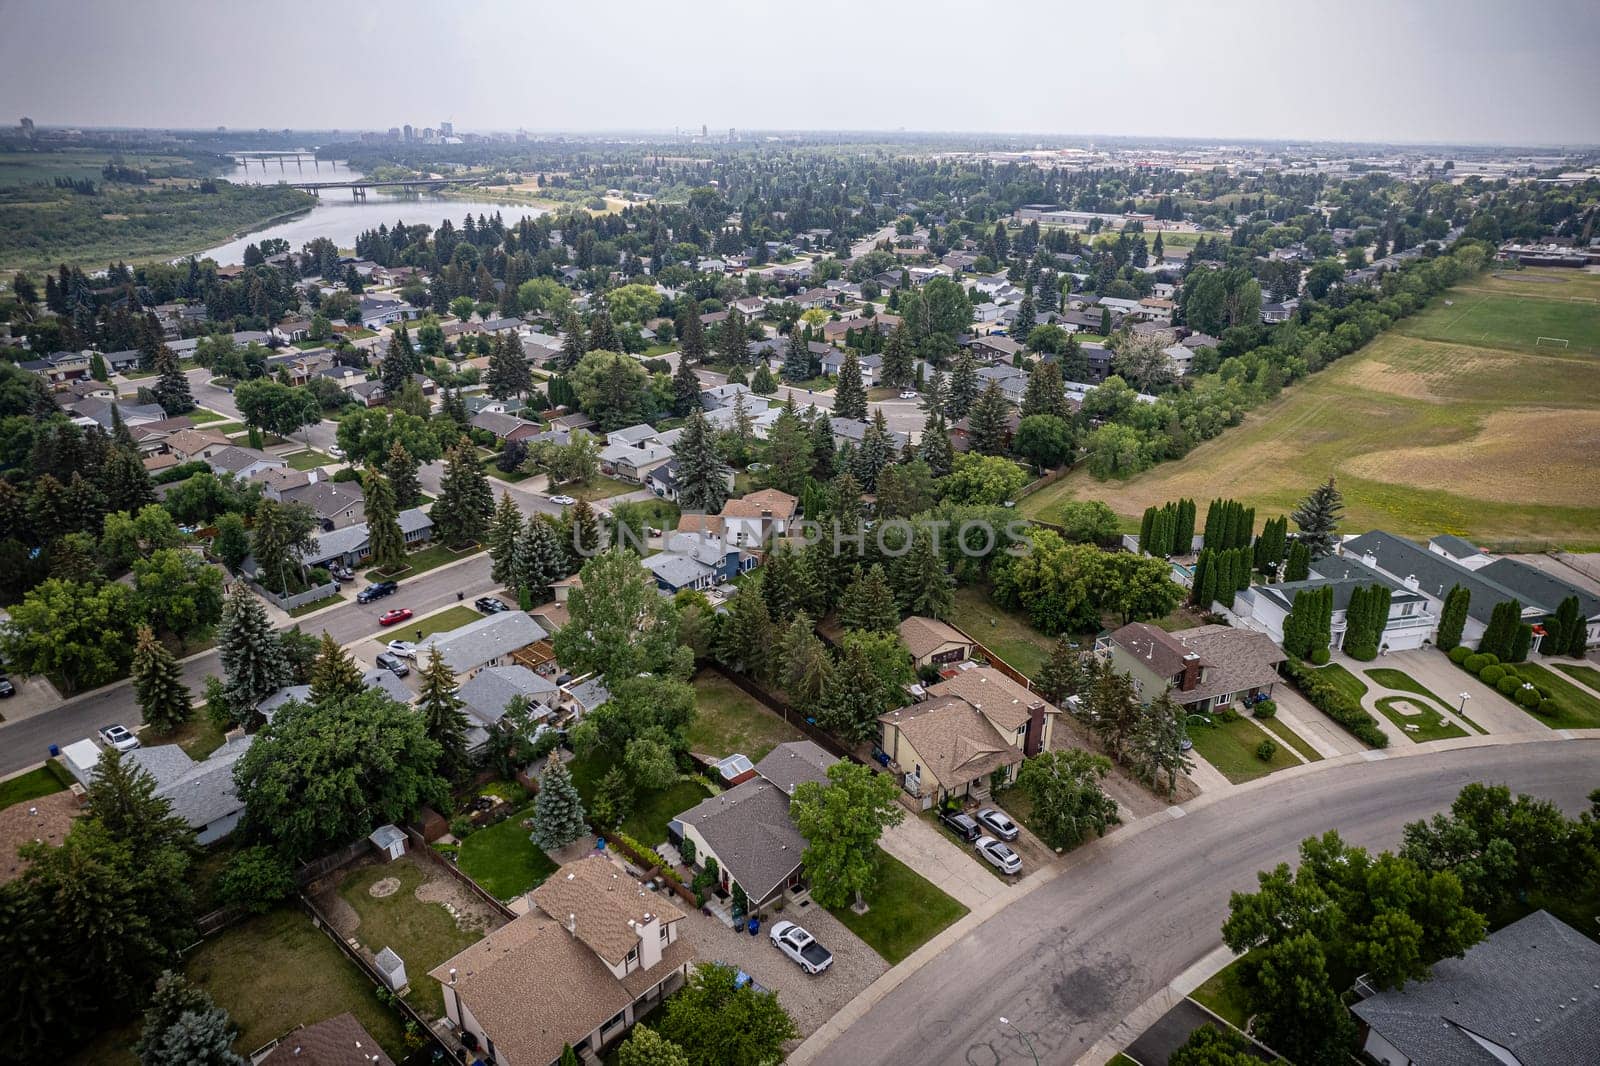 Drone image capturing the charm of River Heights, Saskatoon, with its lush landscapes and residential areas.